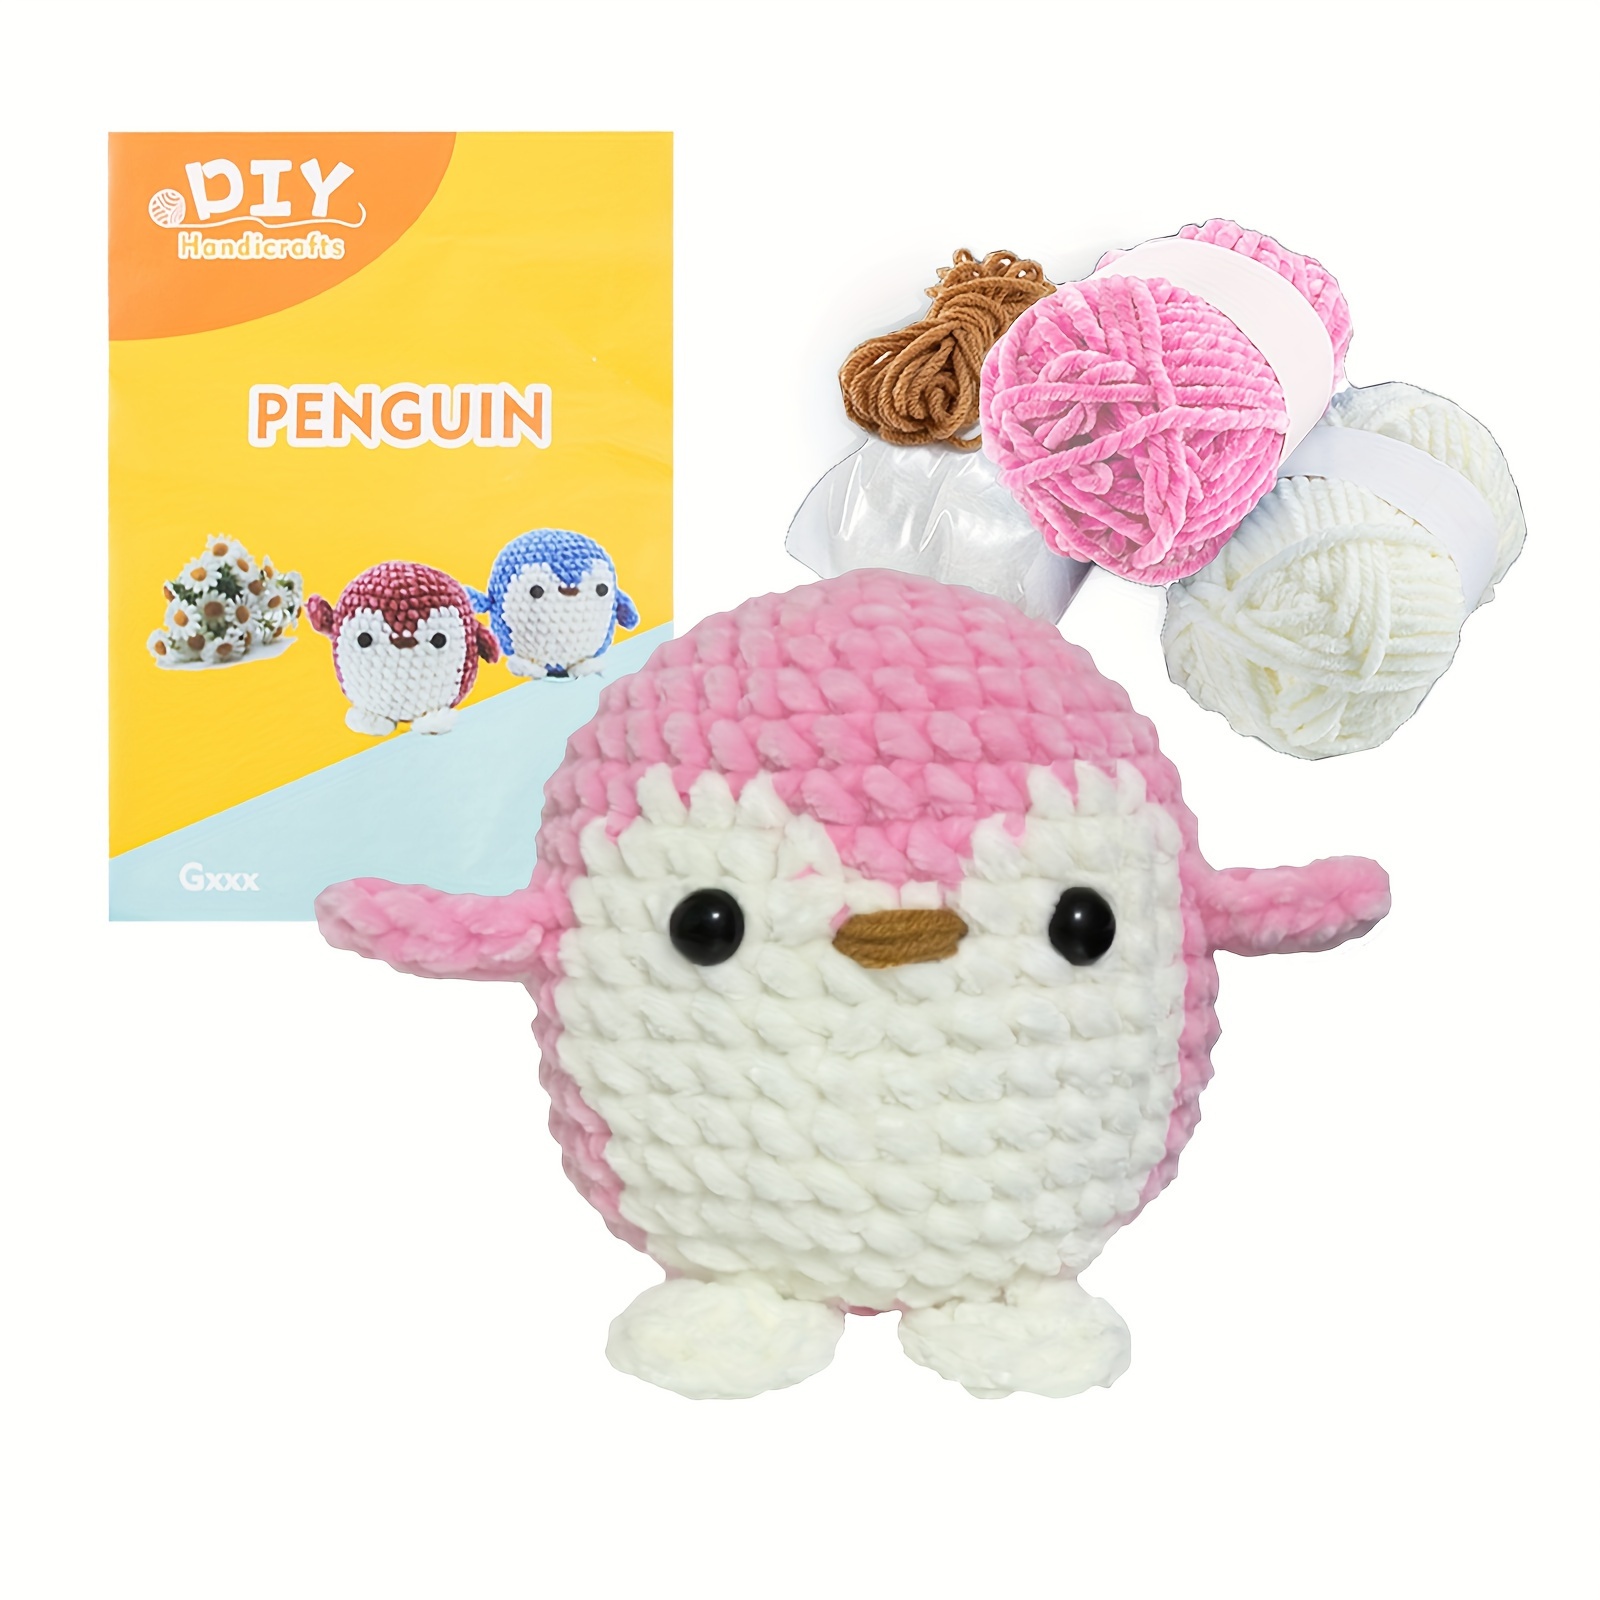 

1set Cute Penguin Crochet Kit For Beginners - Step-by-step Video Tutorials, Adult Friendly, Includes Hook, Scissors, Marker, And Sew Needle- Perfect Gift For Learners